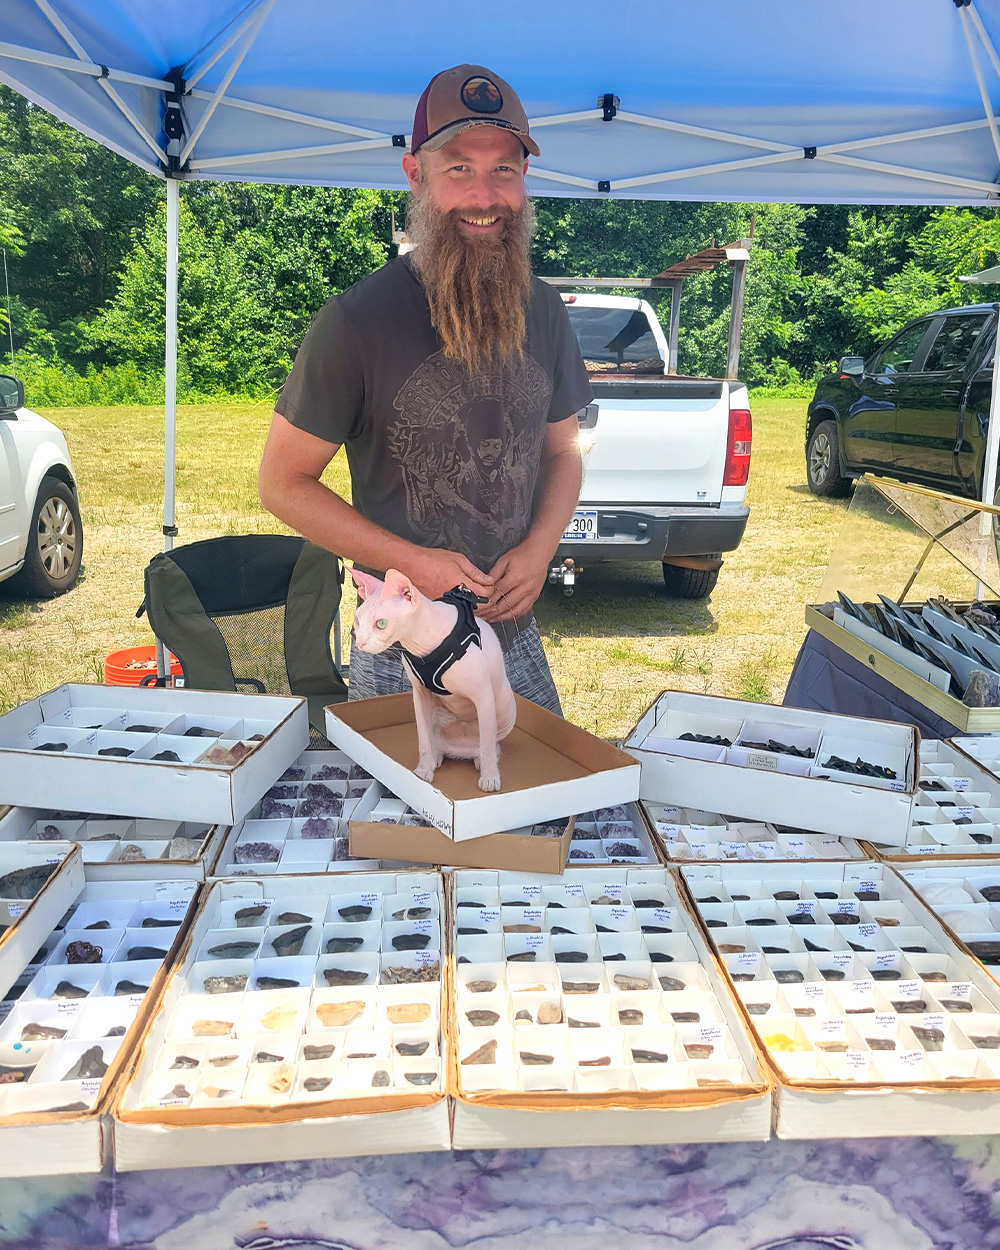 A fossil hunter sells fossilized shark's teeth at a booth.